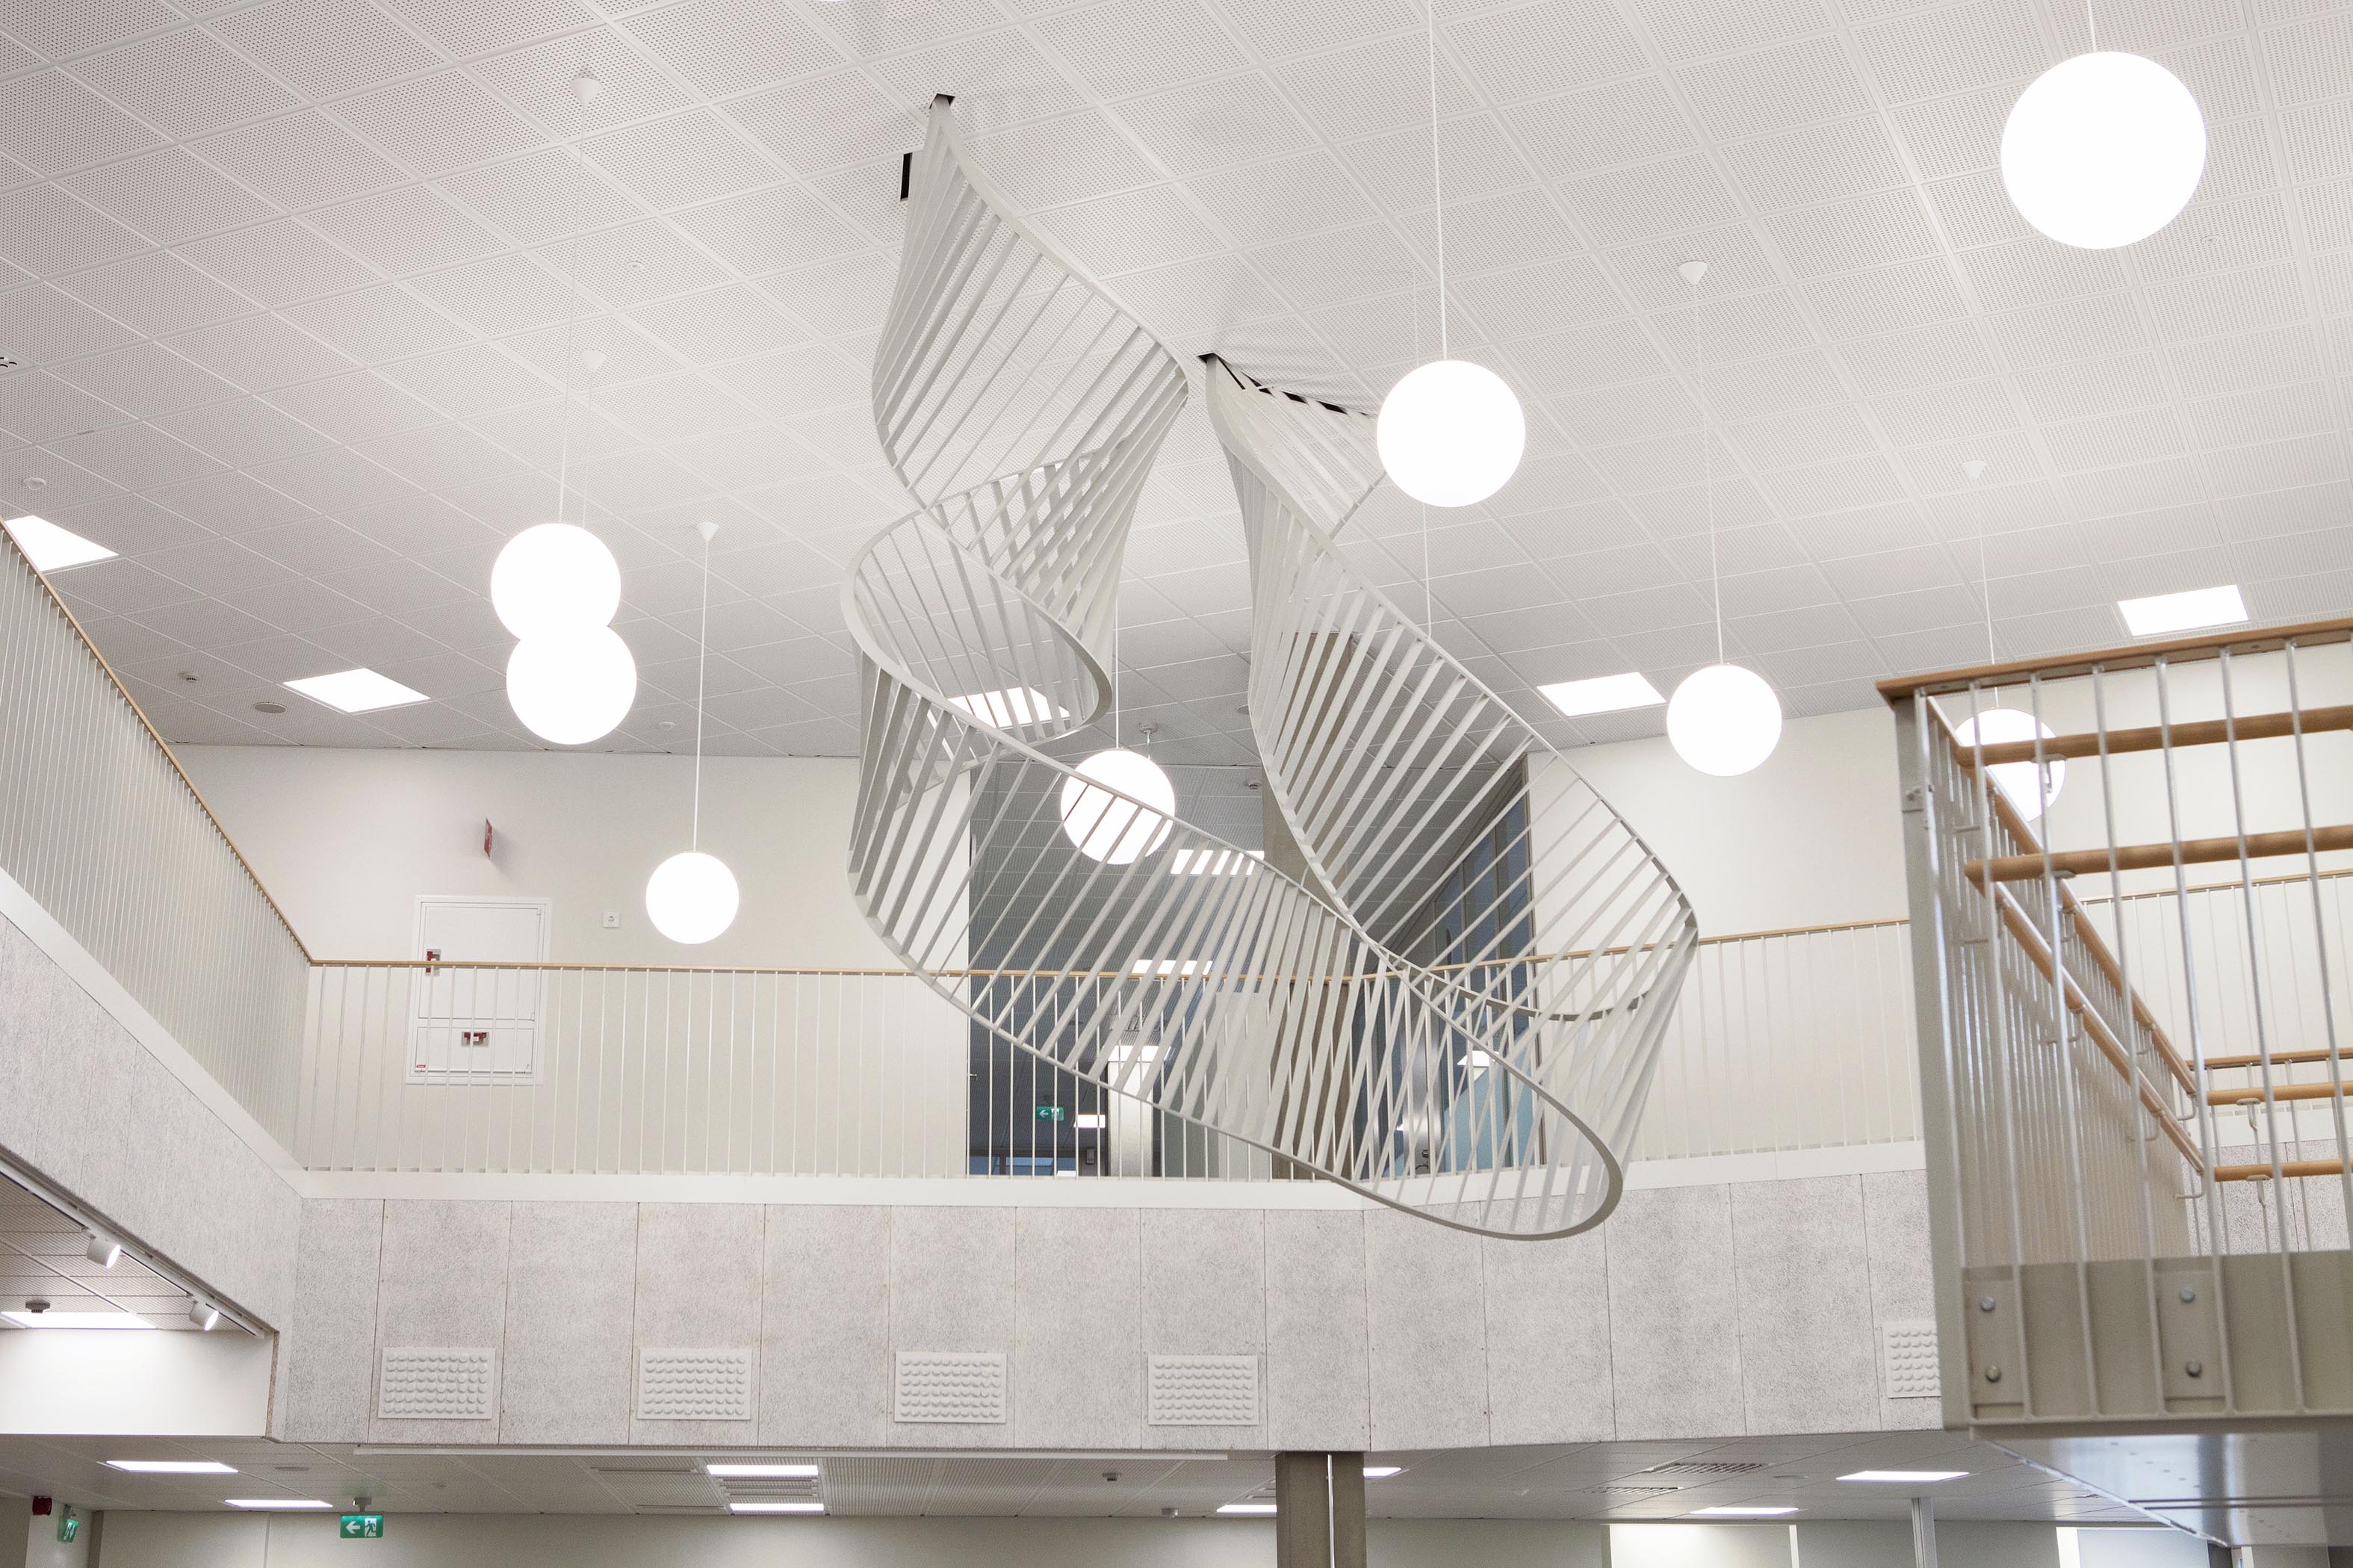 The artwork utilizes handrails of its surrounding space, playing with the different notions of limits, borders and regulations of its environment. The rails are wisted playfully and suspended from the ceiling like serpentine, bringing also resemblance with the structure of DNA. Permanently installed in Metsäkaltevatalo primary school at Hyvinkää.